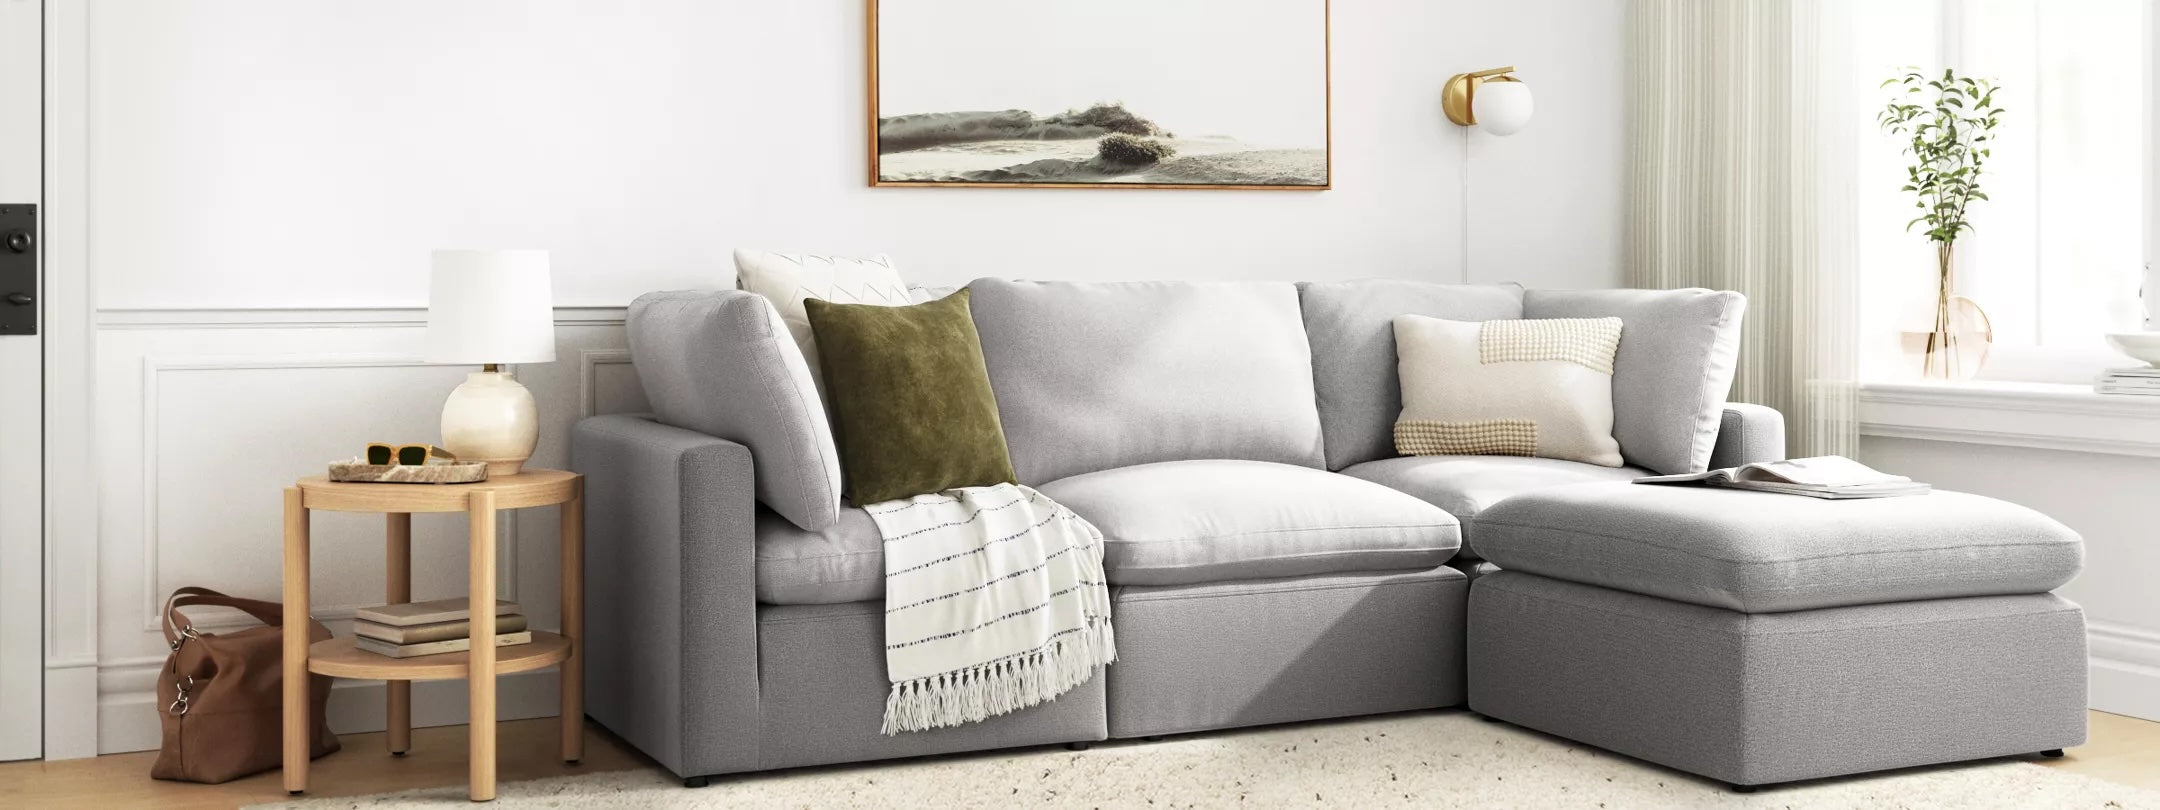 A cozy living room corner features a light gray sectional sofa adorned with various throw pillows and a blanket. A round wooden side table holds a lamp and decor items, while a landscape painting and wall-mounted lamp add to the room's ambiance.